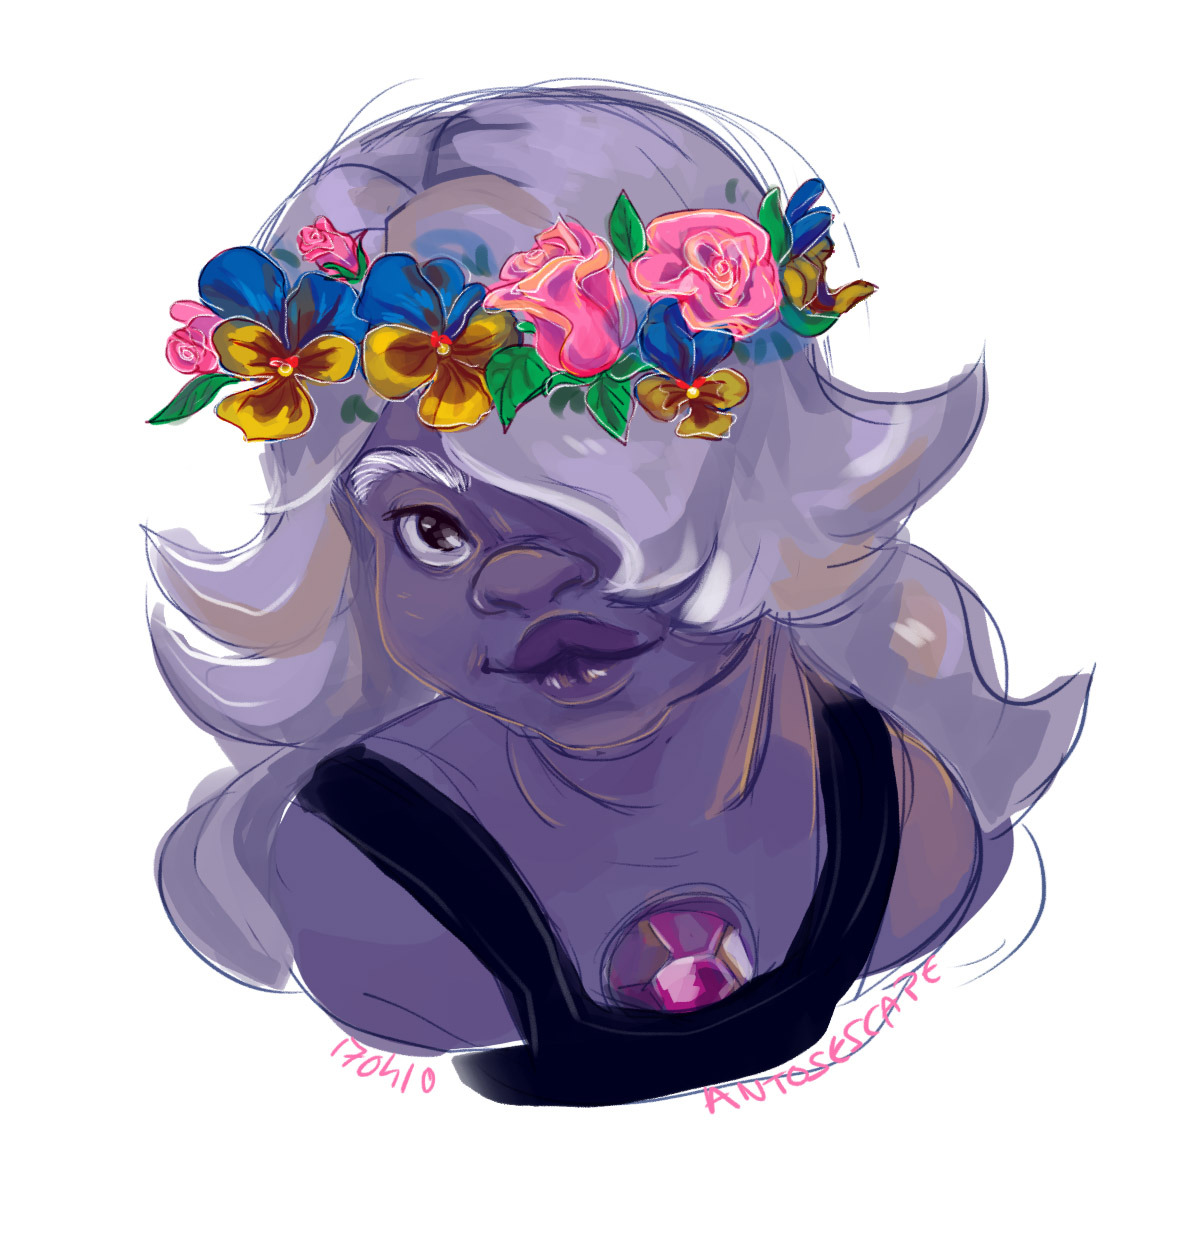 another flower crown portrait Amethyst this time. pansies and pink roses check my blog for Pearl Garnet is next flower crown commissions are now 25$(5$ off)...